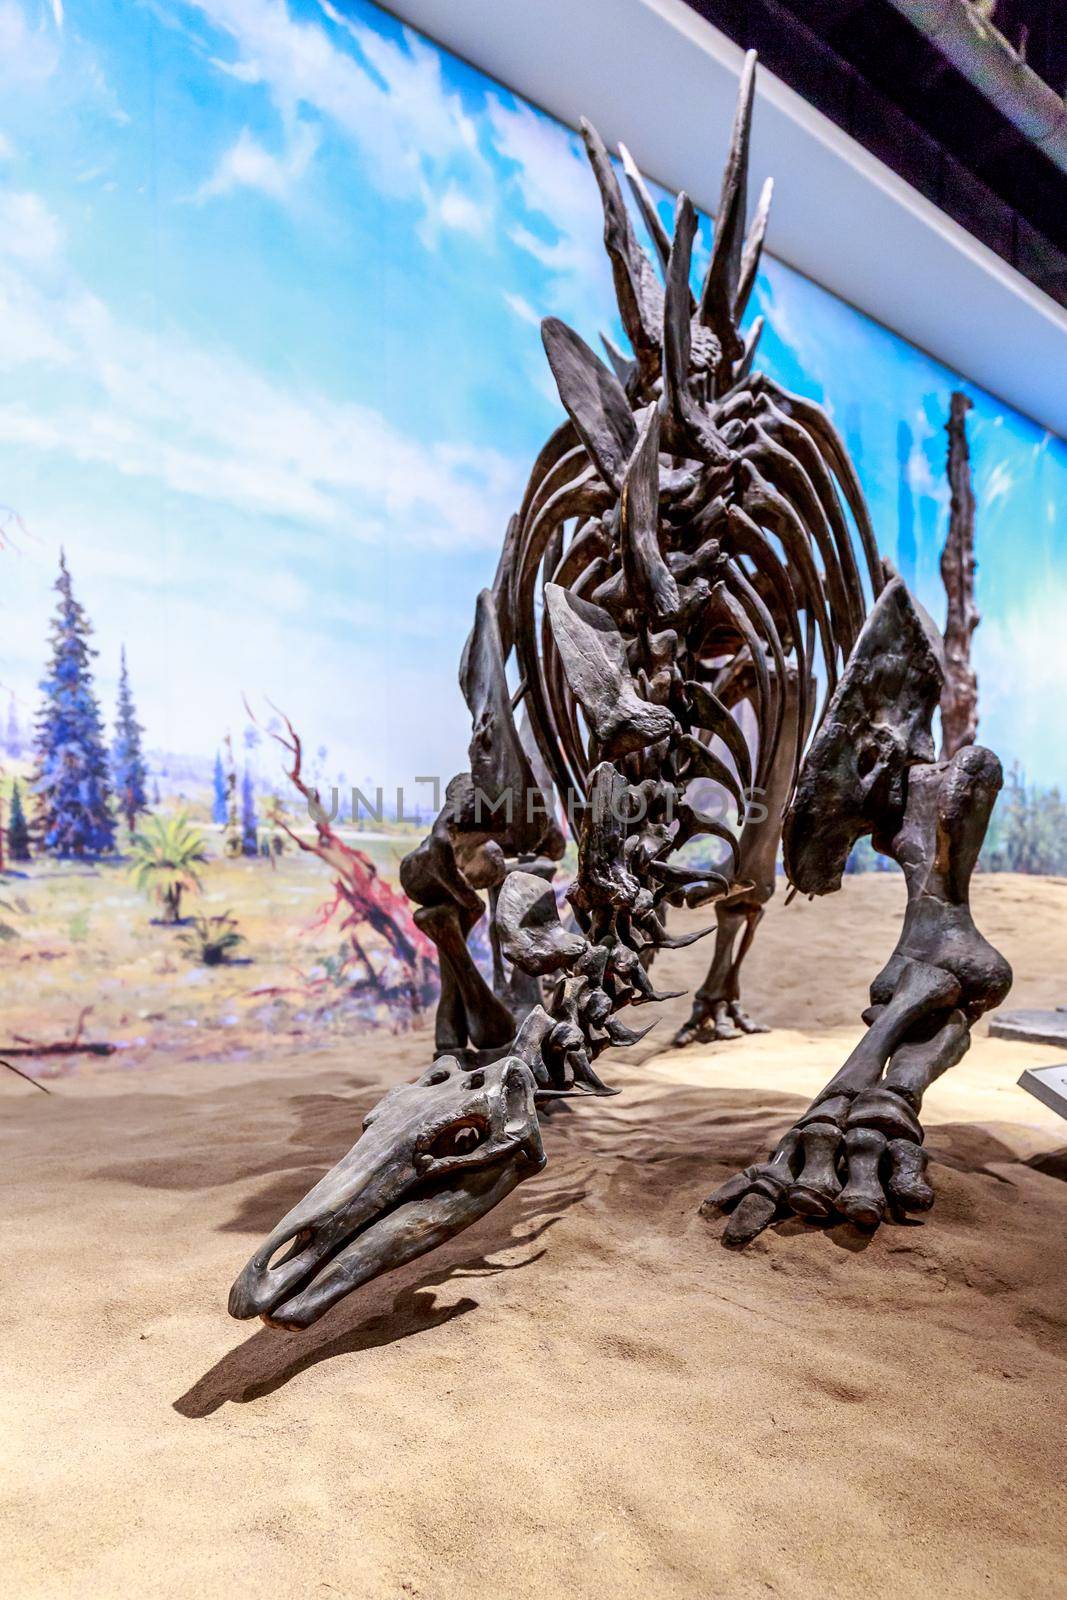 Fossil Exhibit in Royal Tyrrell Museum by gepeng